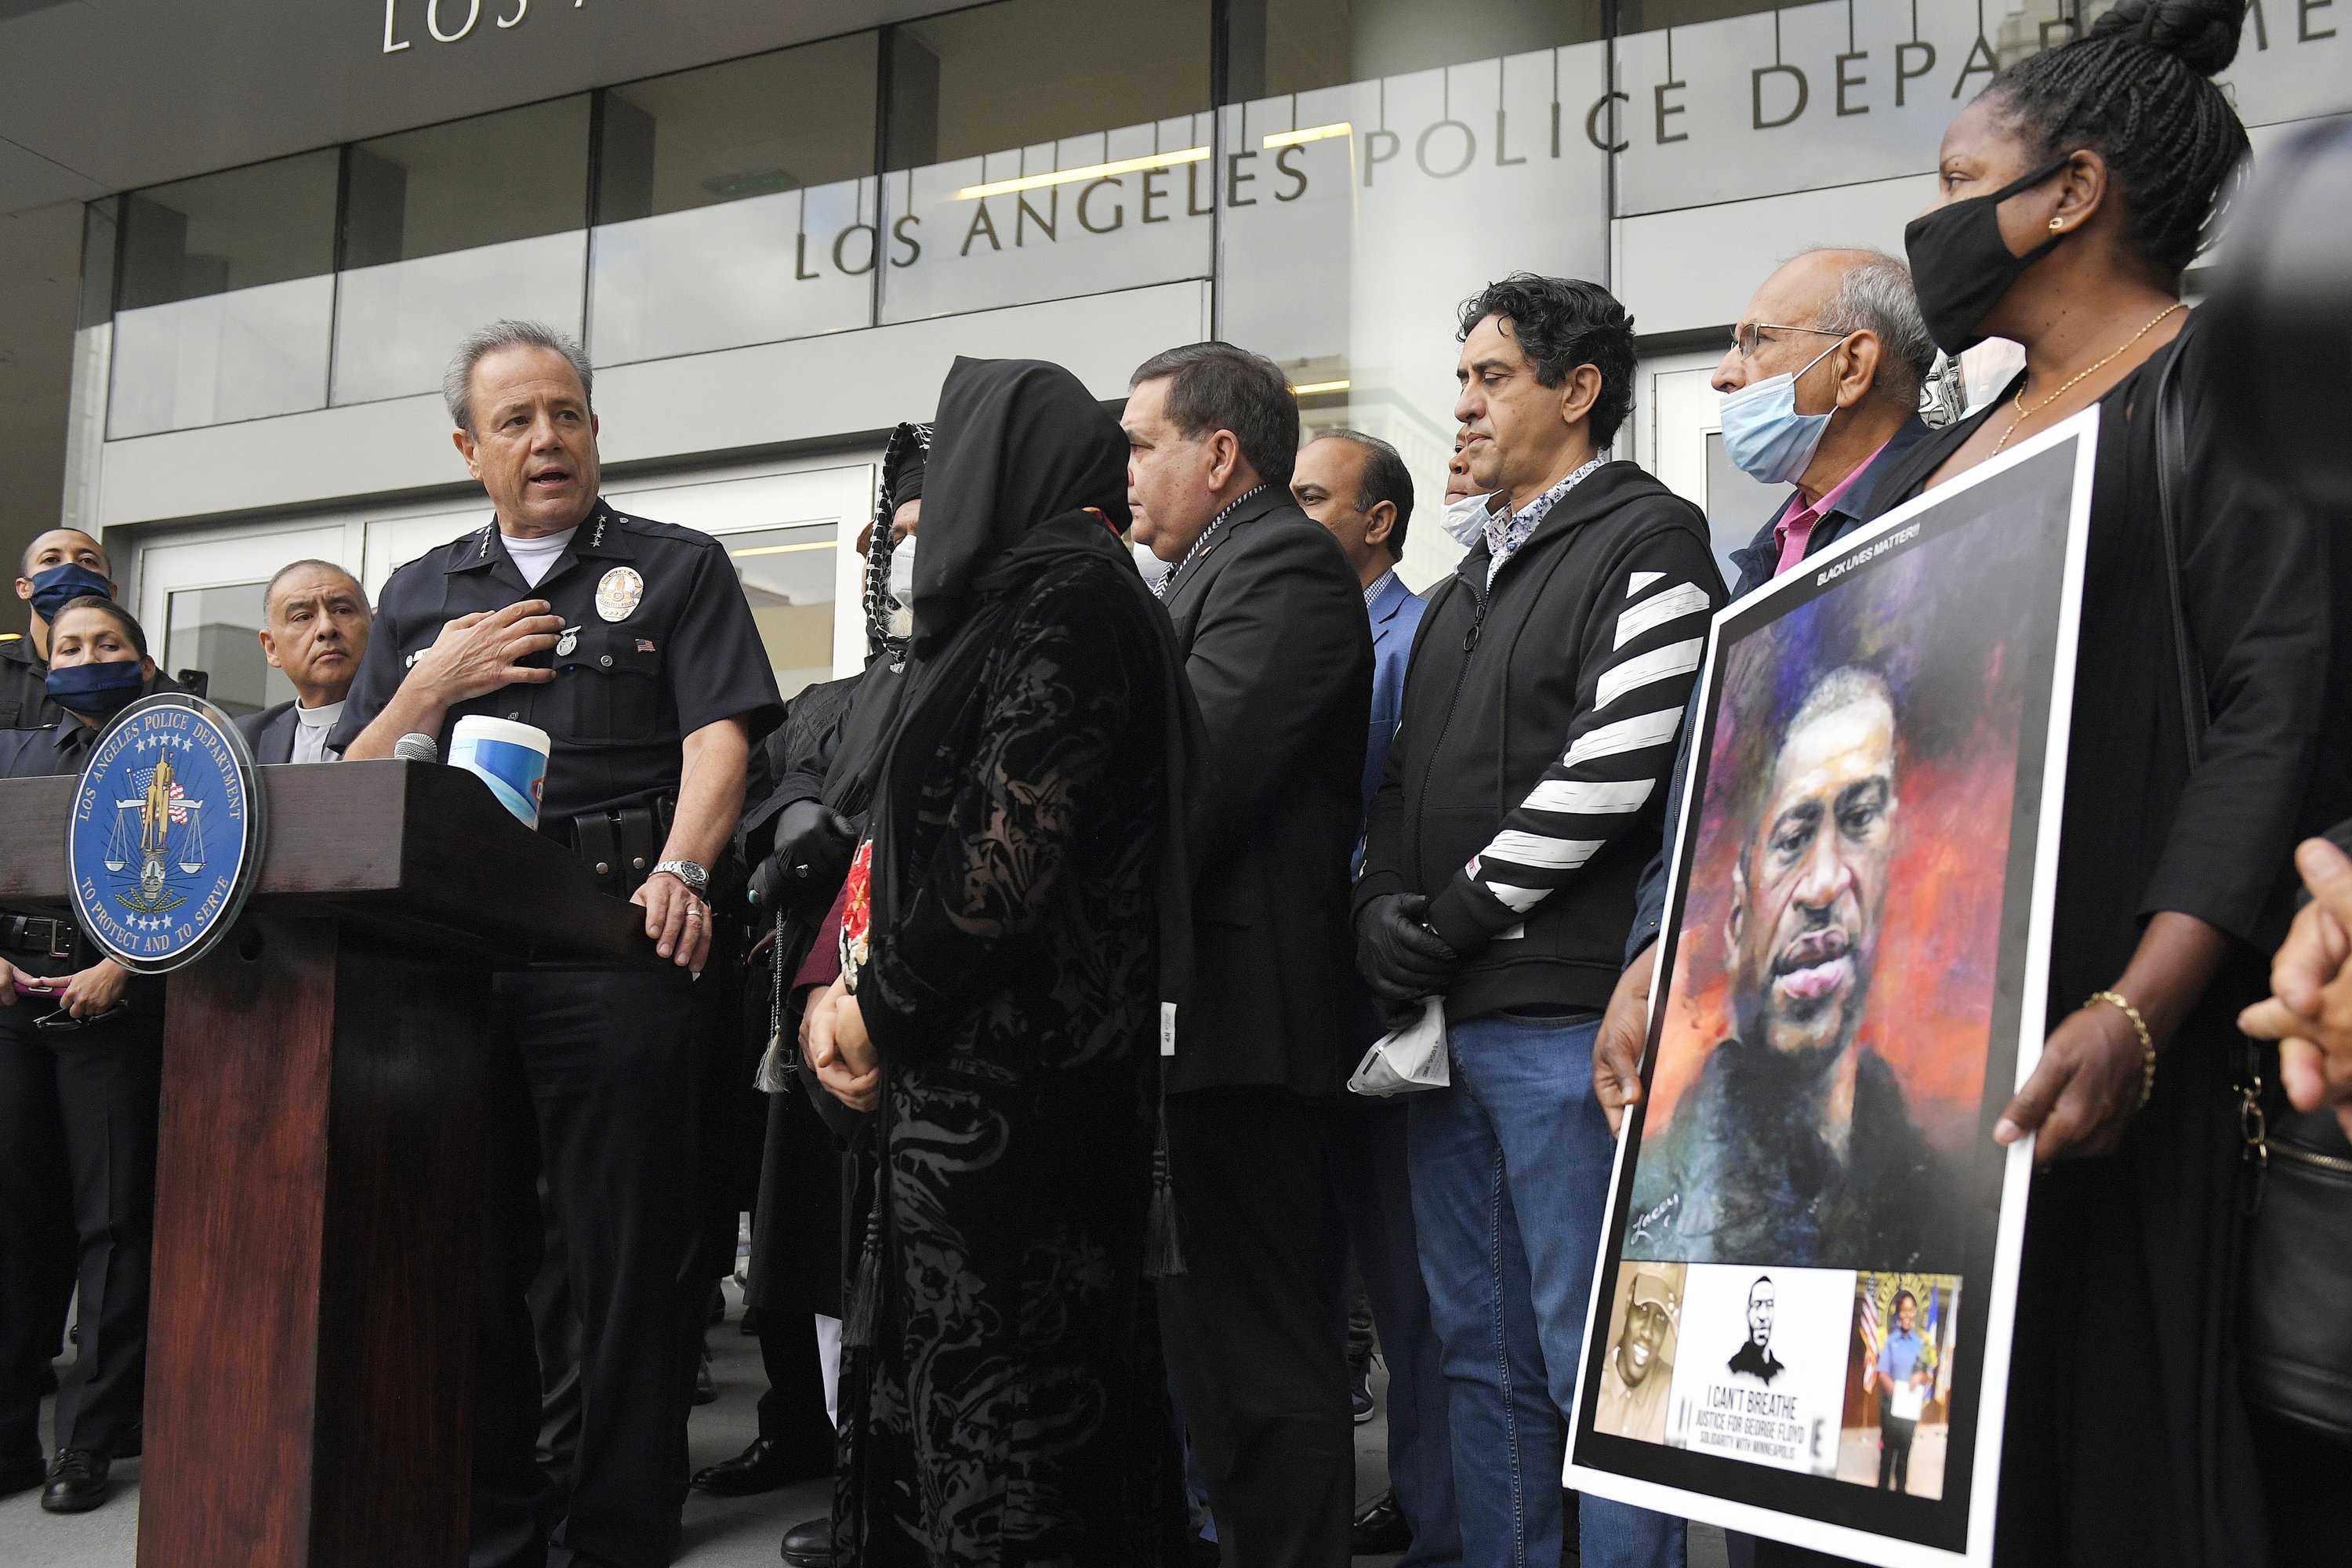 LAPD, police union outraged by Floyd ‘Valentine’ report